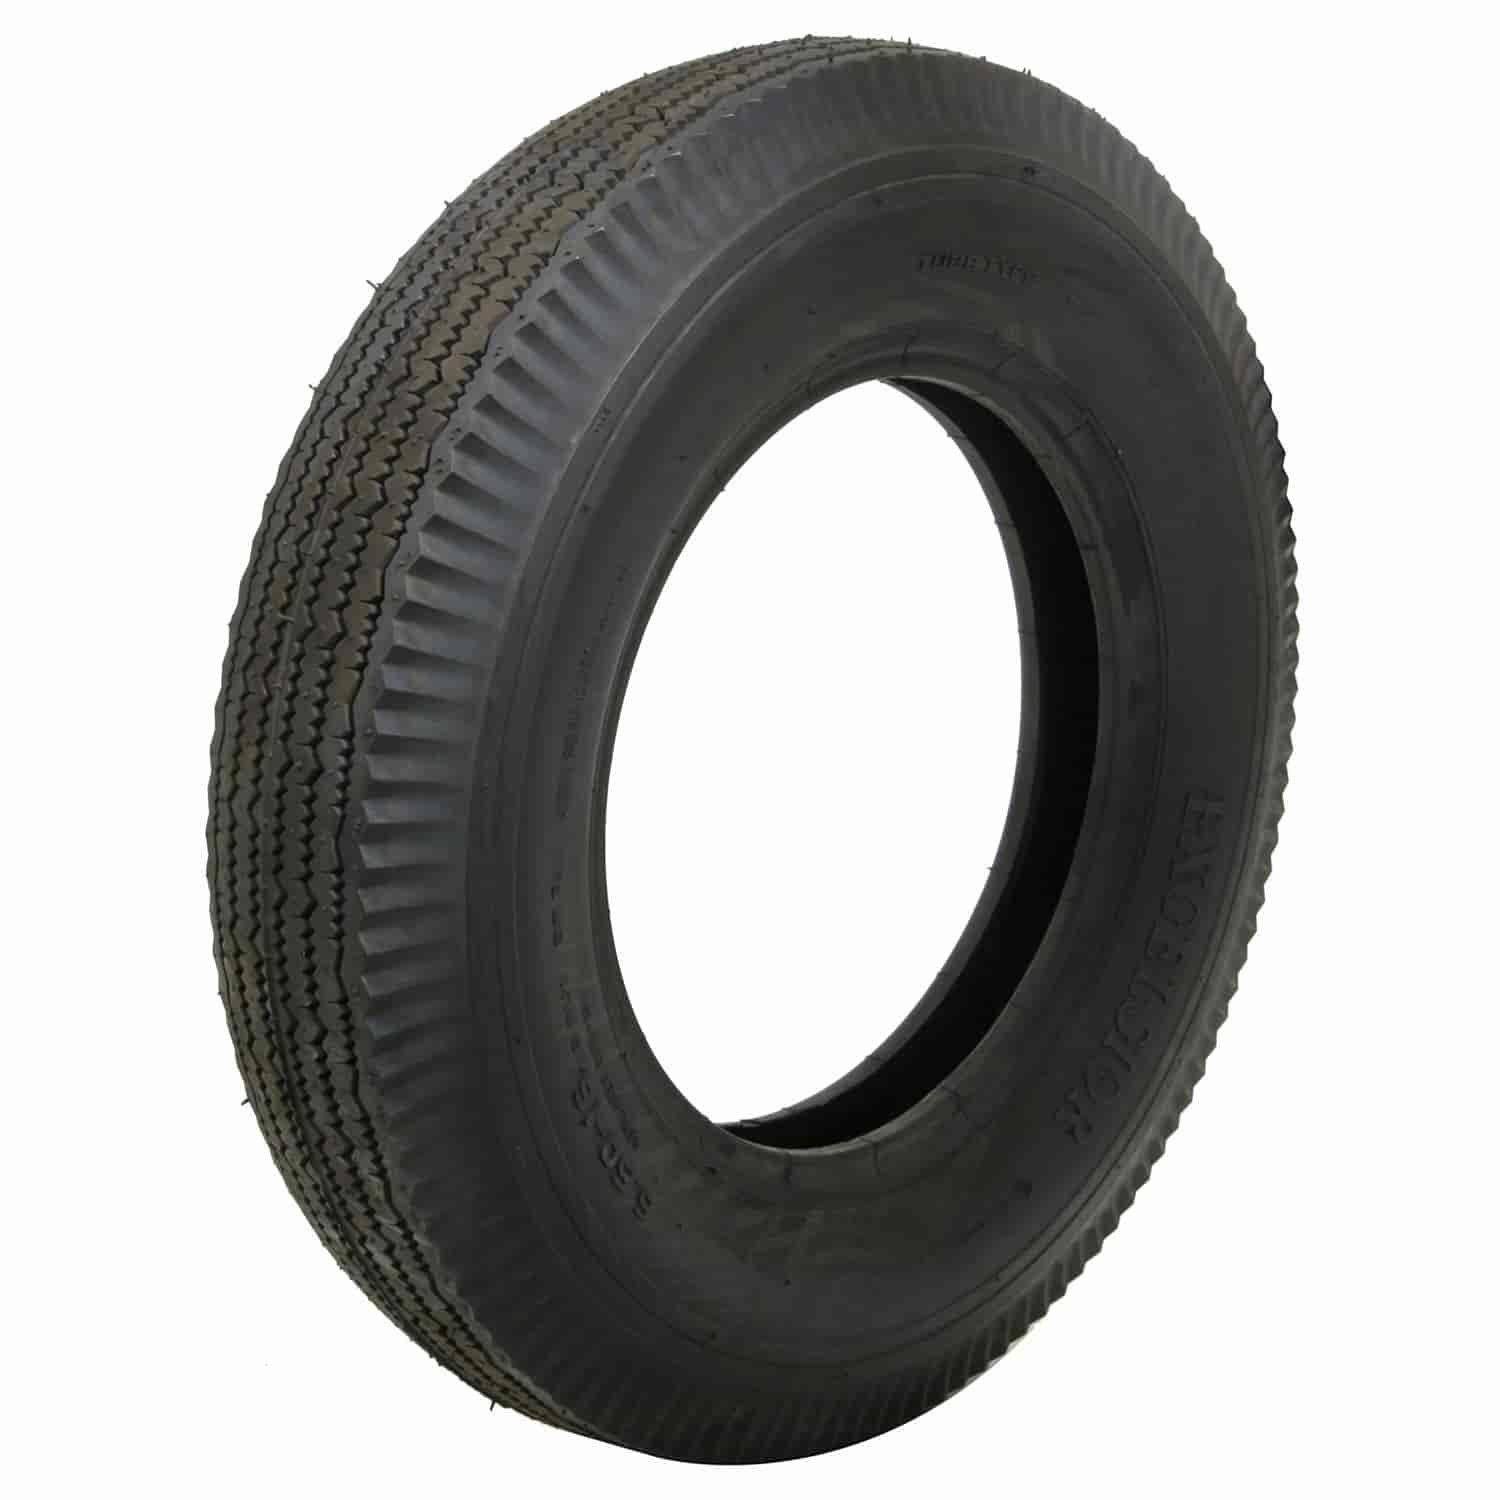 663495 Excelsior Bias Ply Tire 650-16